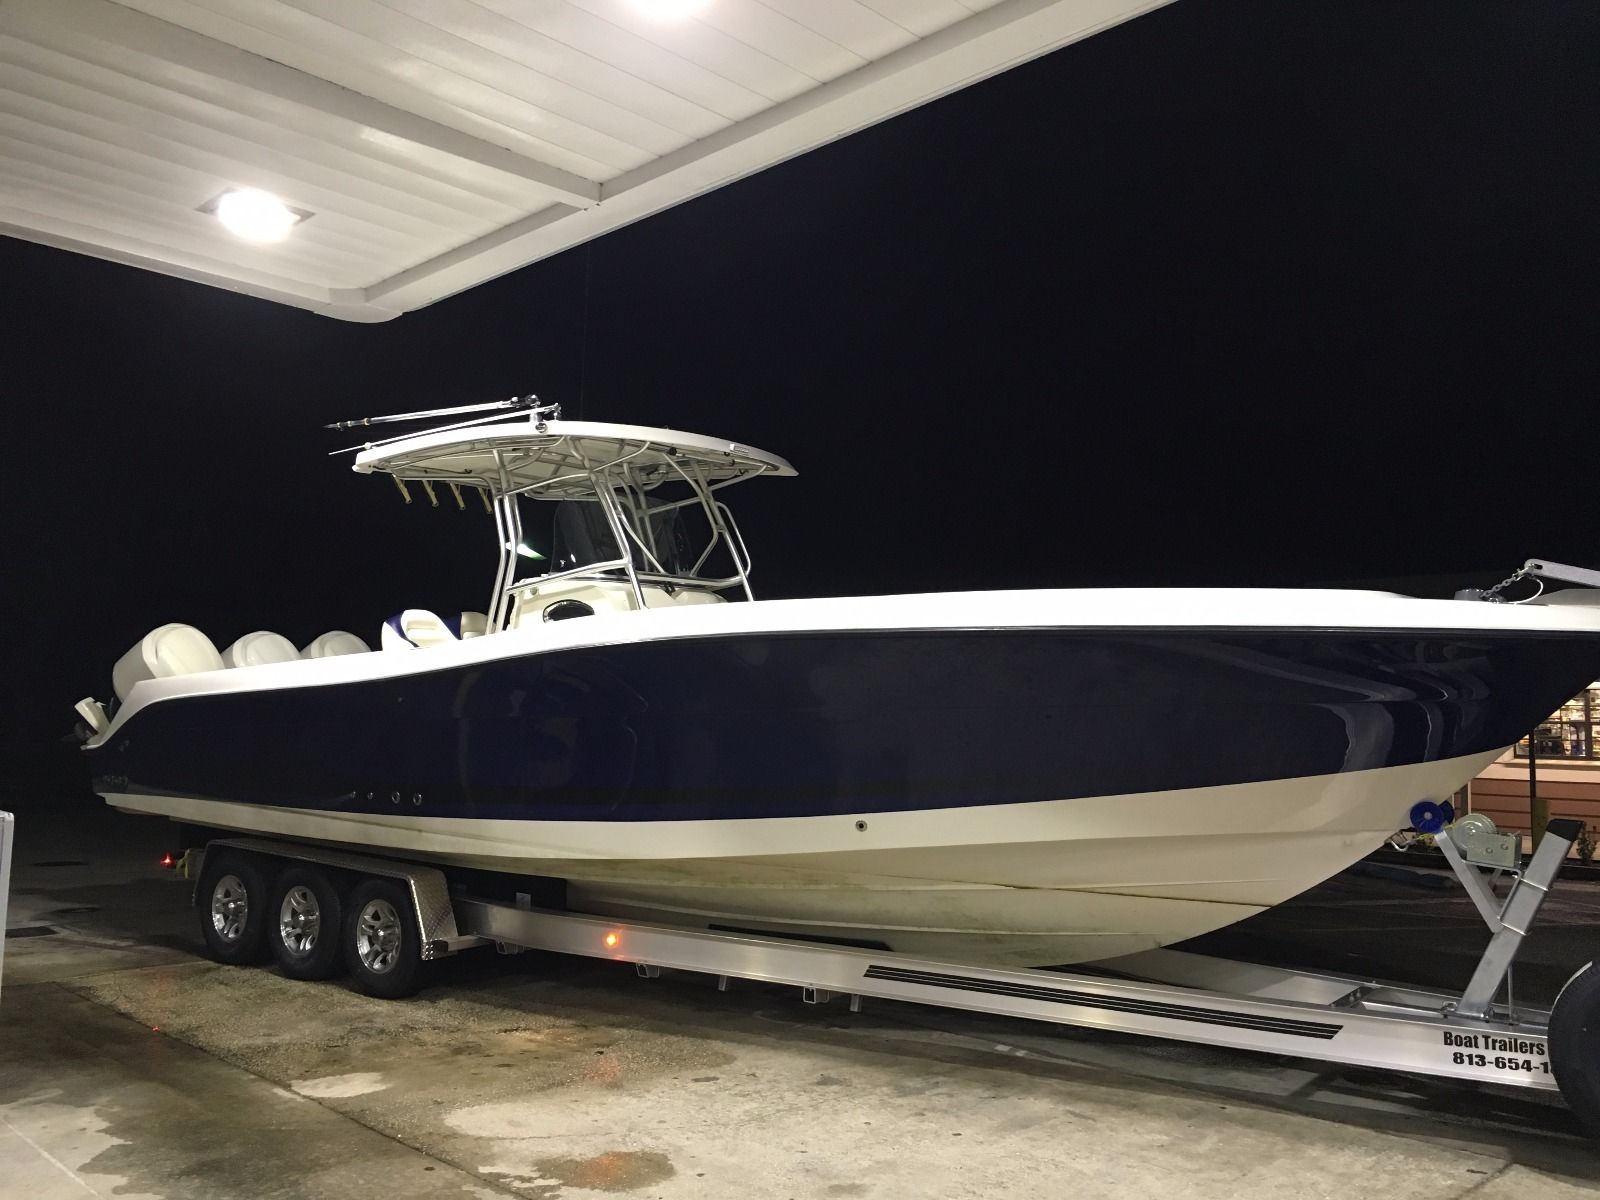 BOAT TRAILERS DIRECT 2016 for sale for $4,195 - Boats-from ...